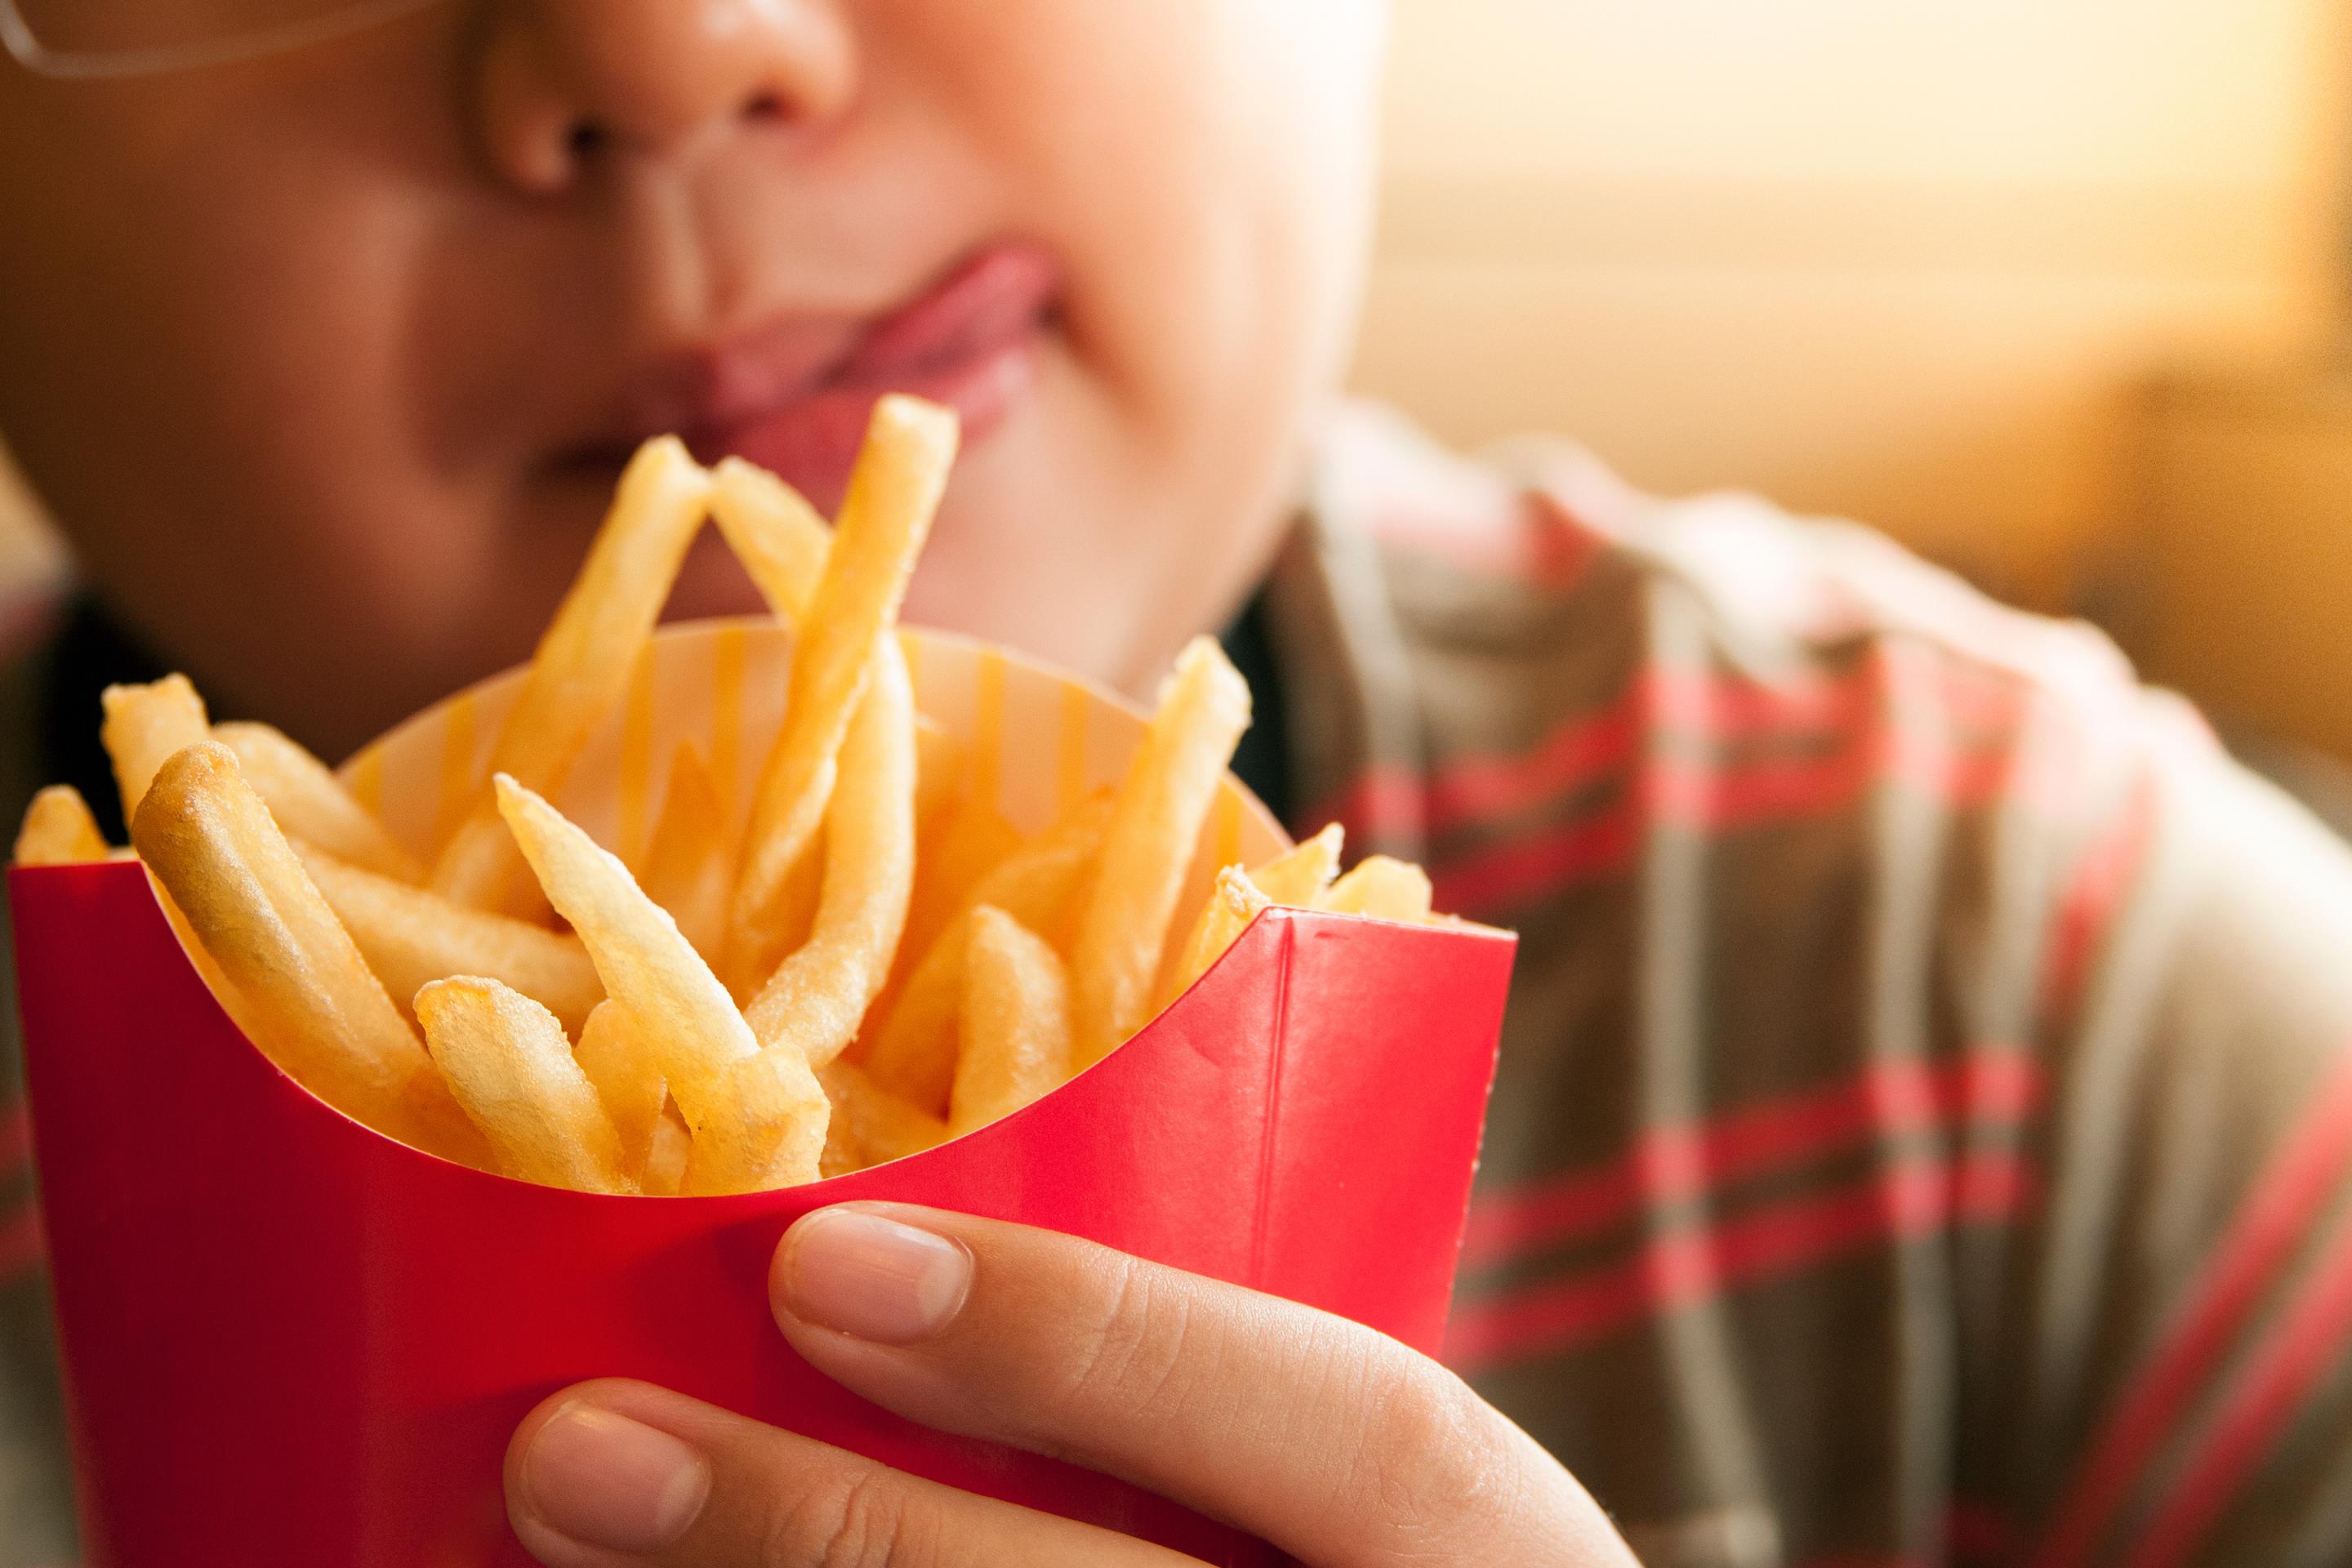 A young boy holds a red open co<em></em>ntainer filled with french fries.